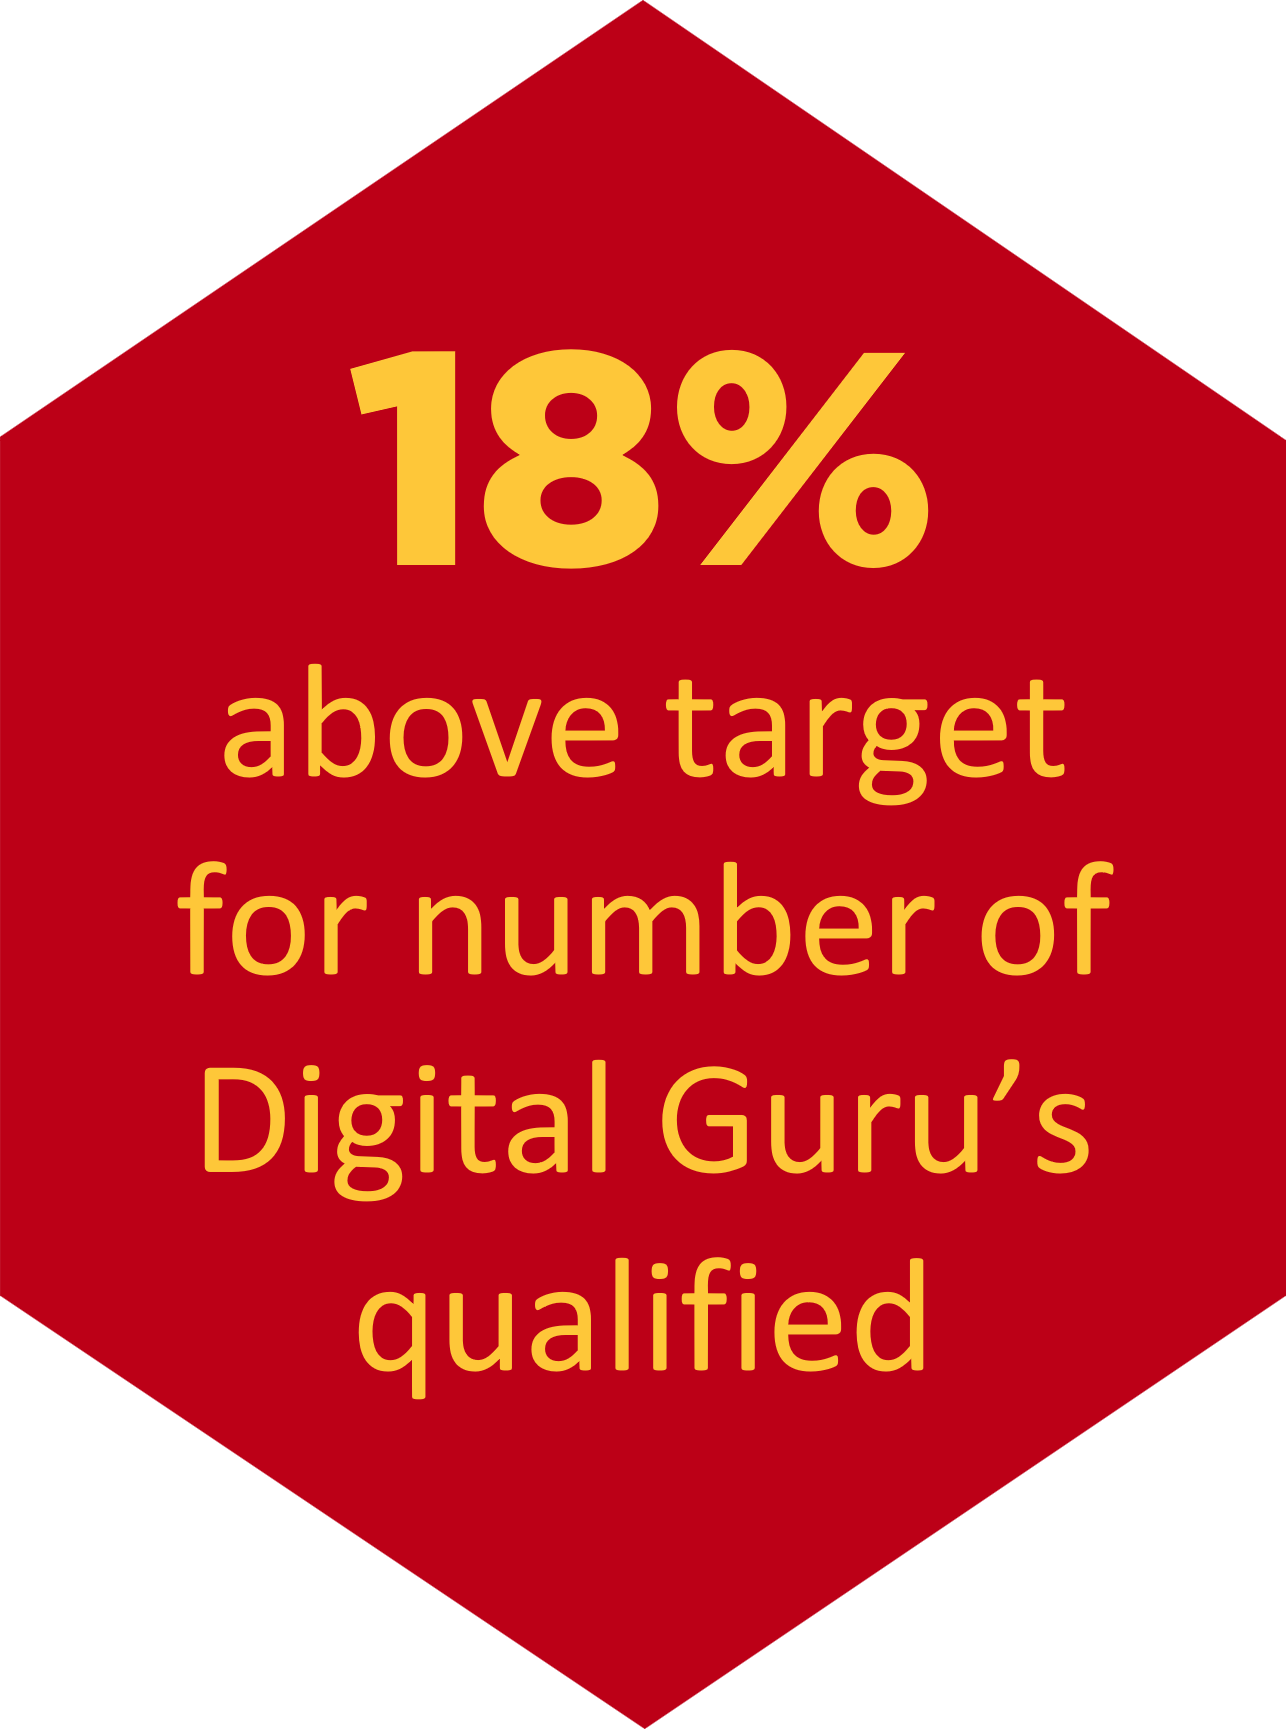 A bright red hexagon with yellow text inside saying '18% above target for number of Digital Guru's qualified'.